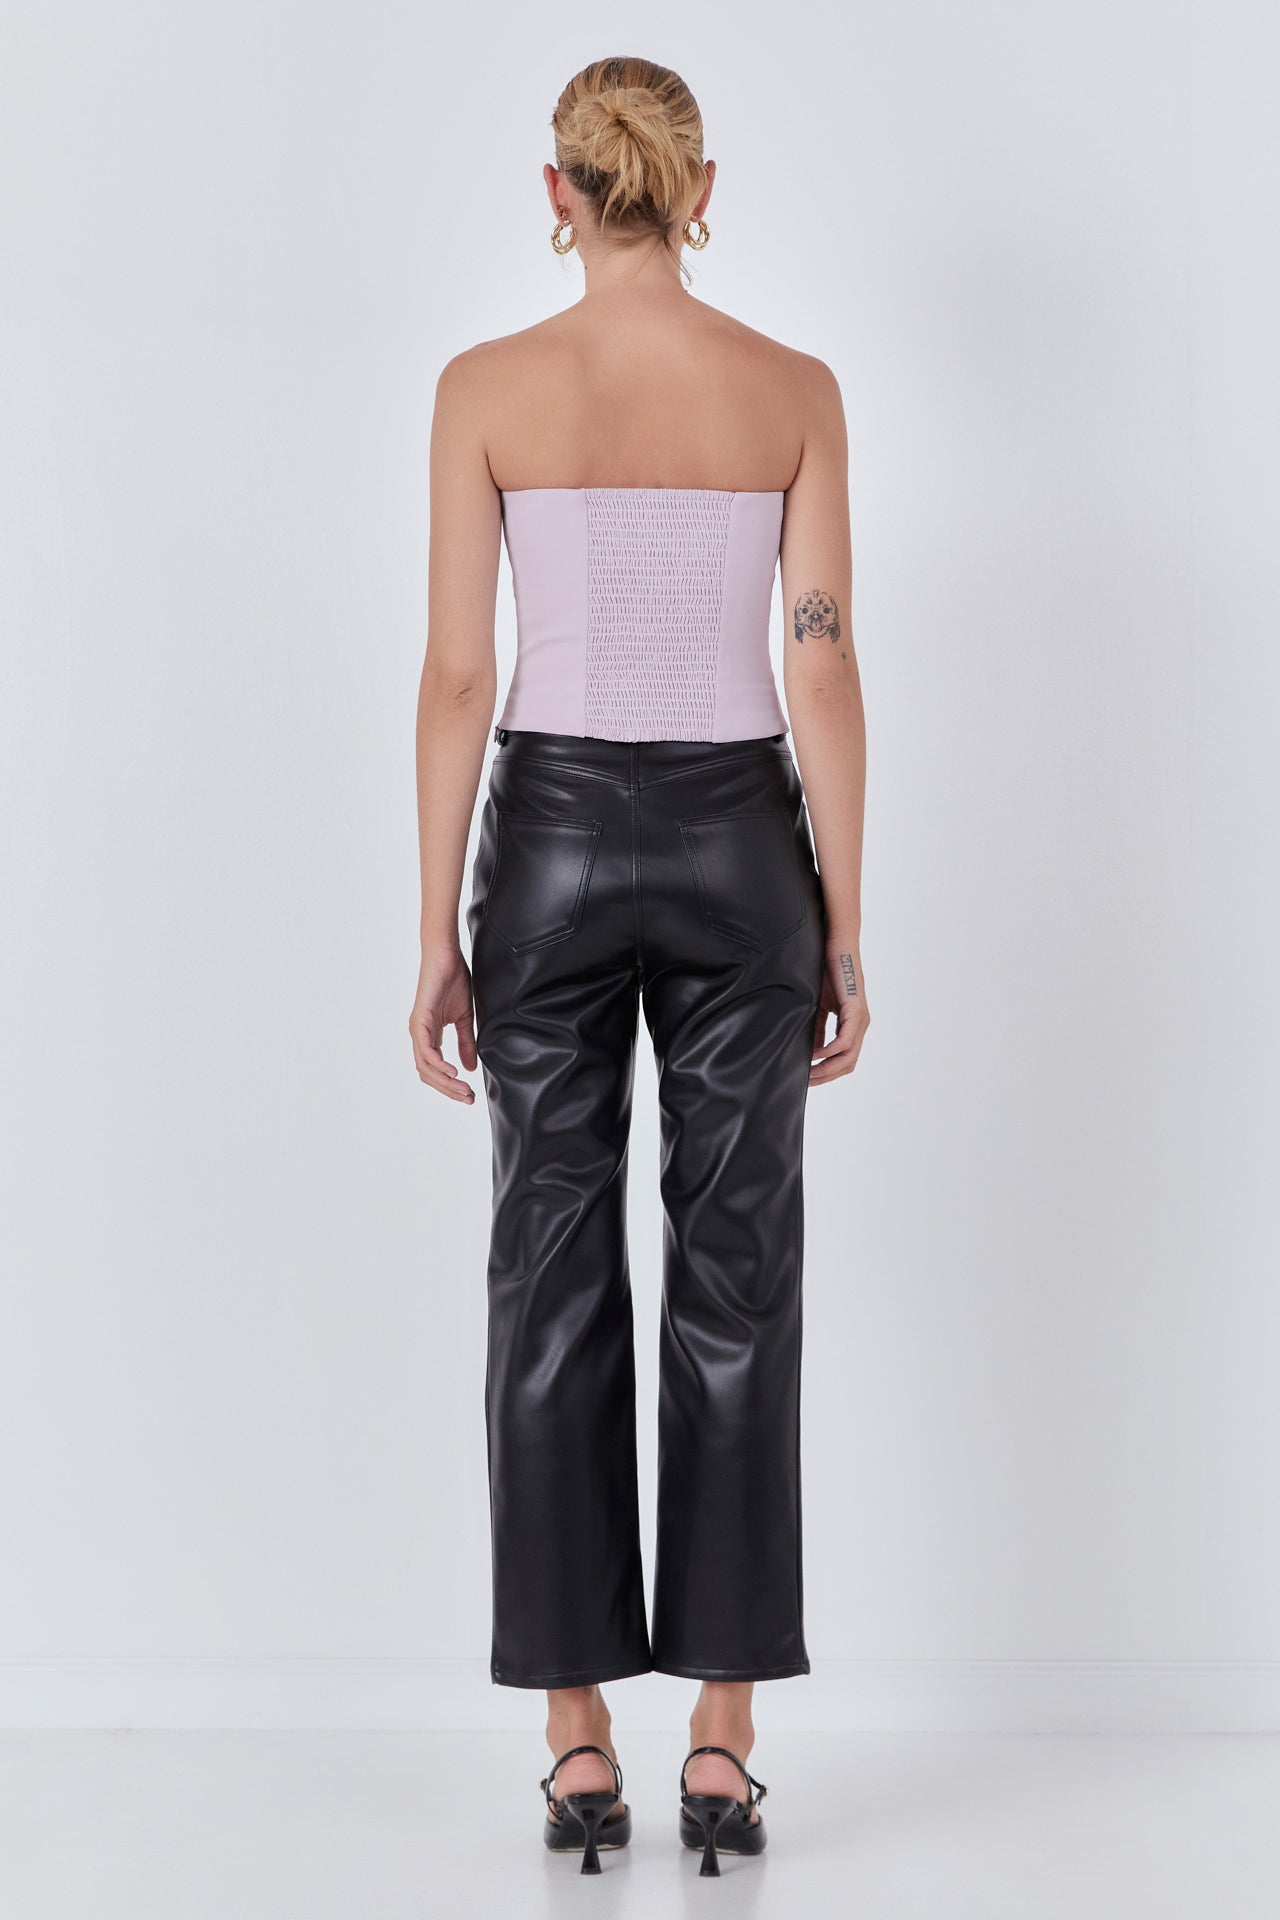 ENDLESS ROSE - Strapless Rose Top - TOPS available at Objectrare